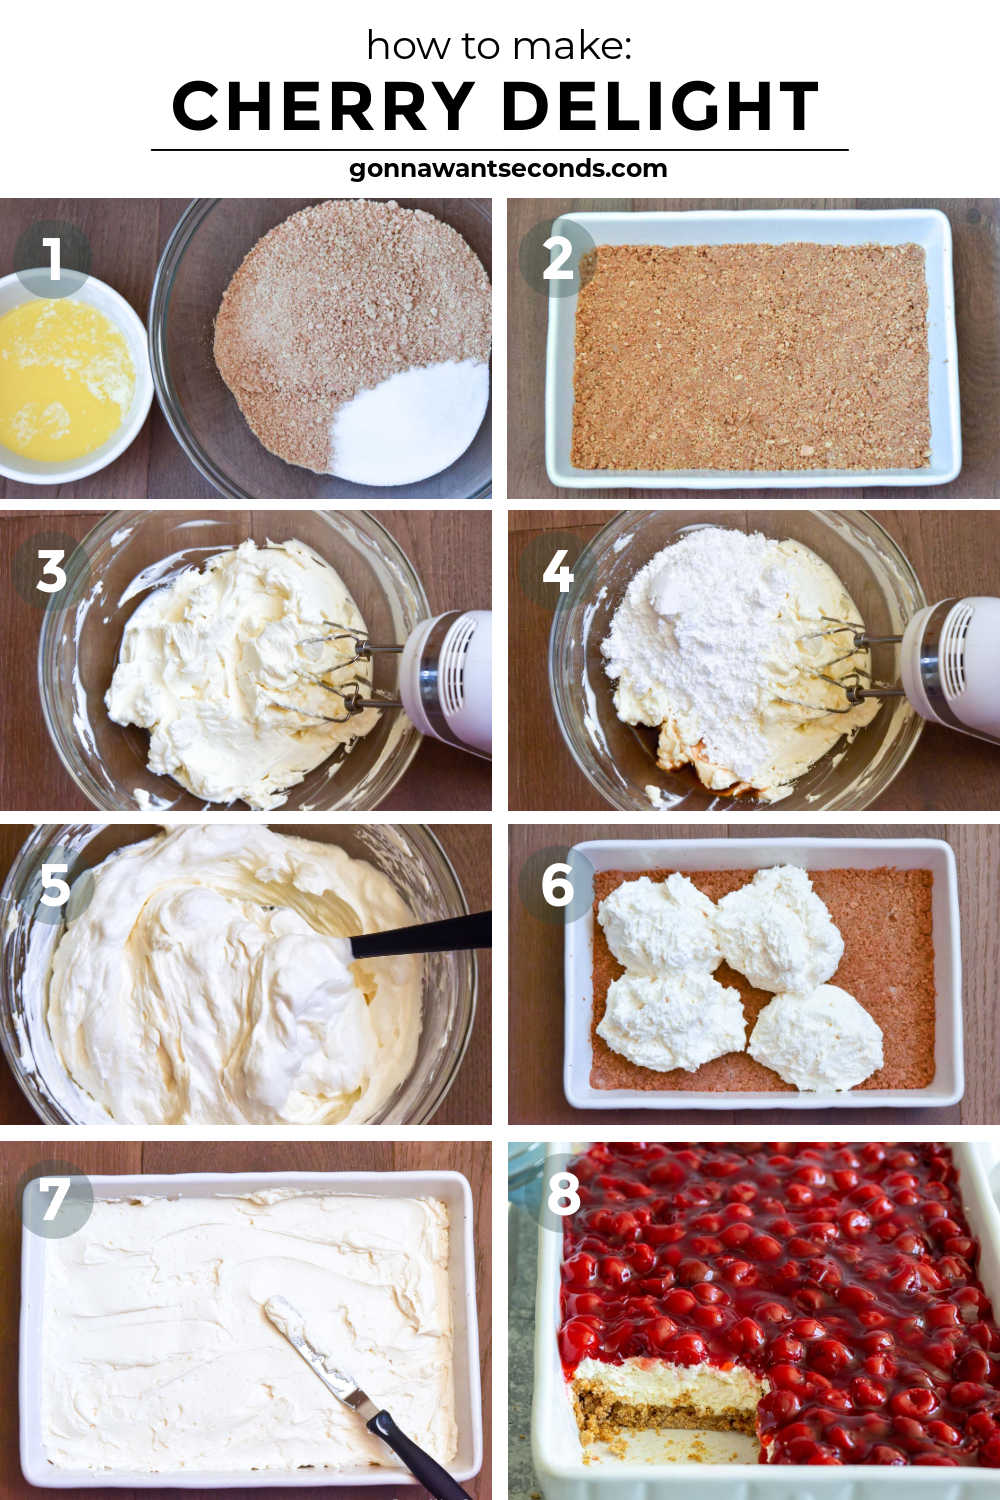 Step by step how to make cherry delight